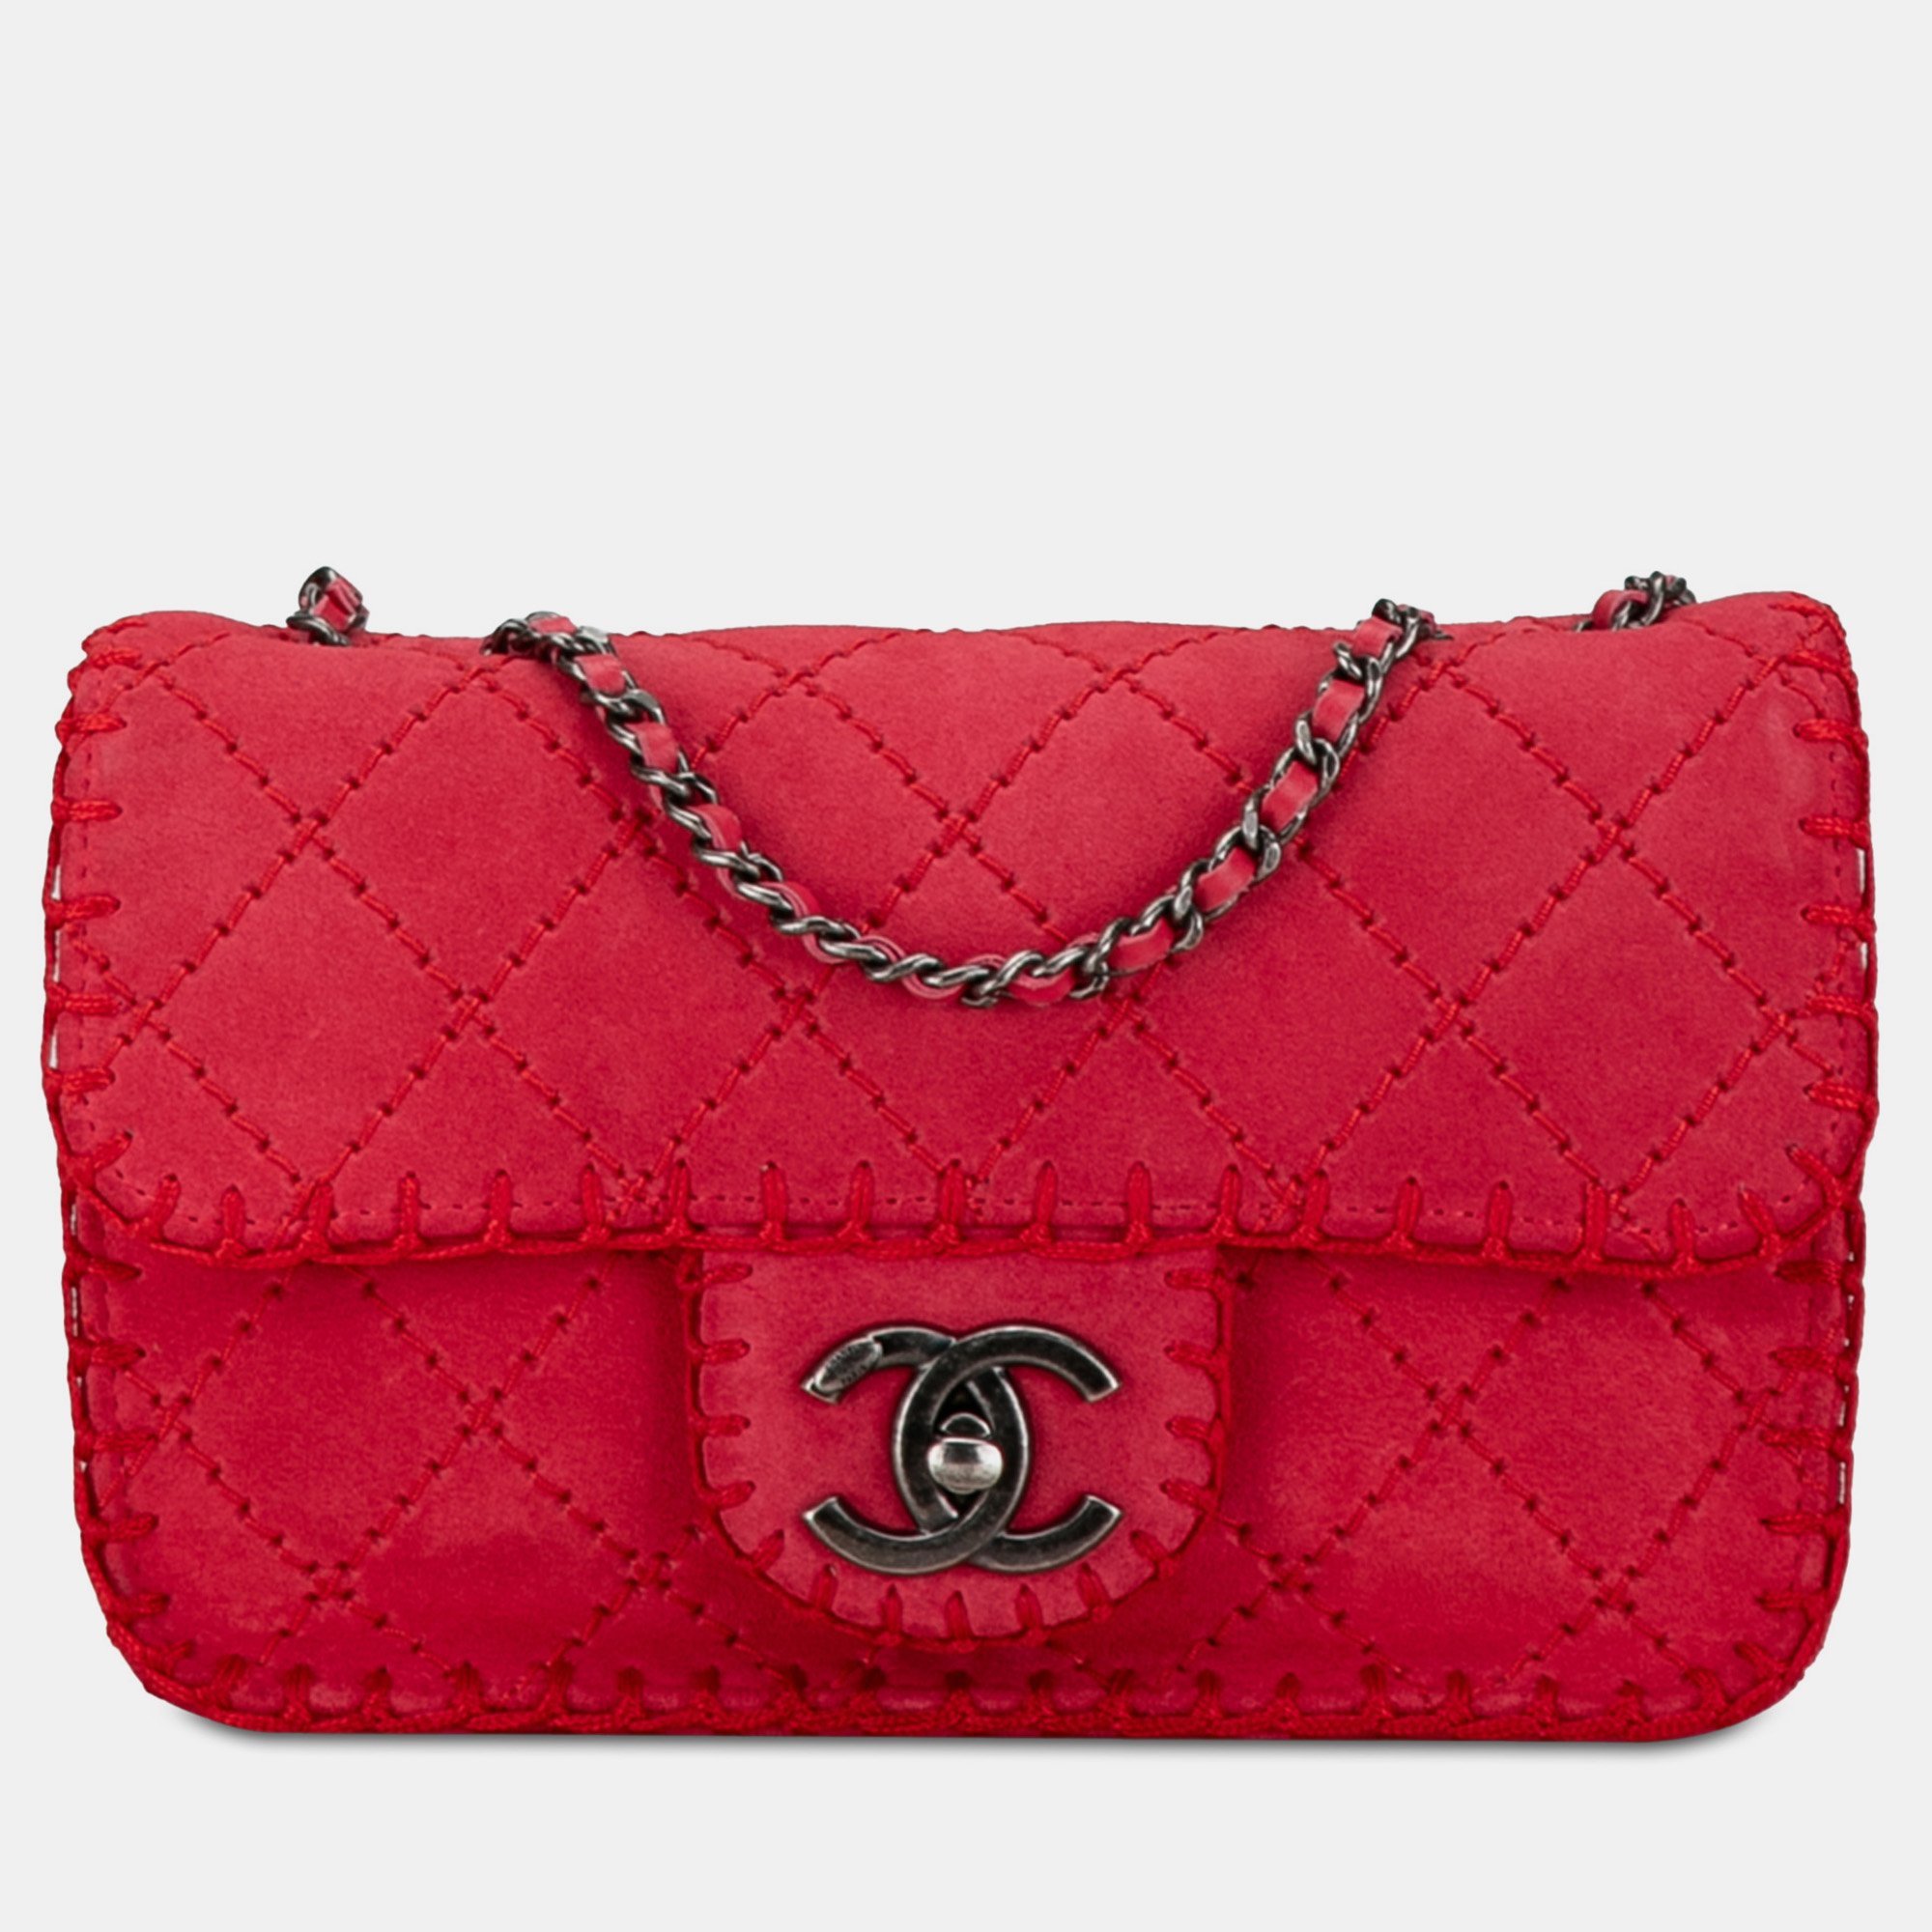 

Chanel Small Quilted Suede Stitched Single Flap Bag, Red